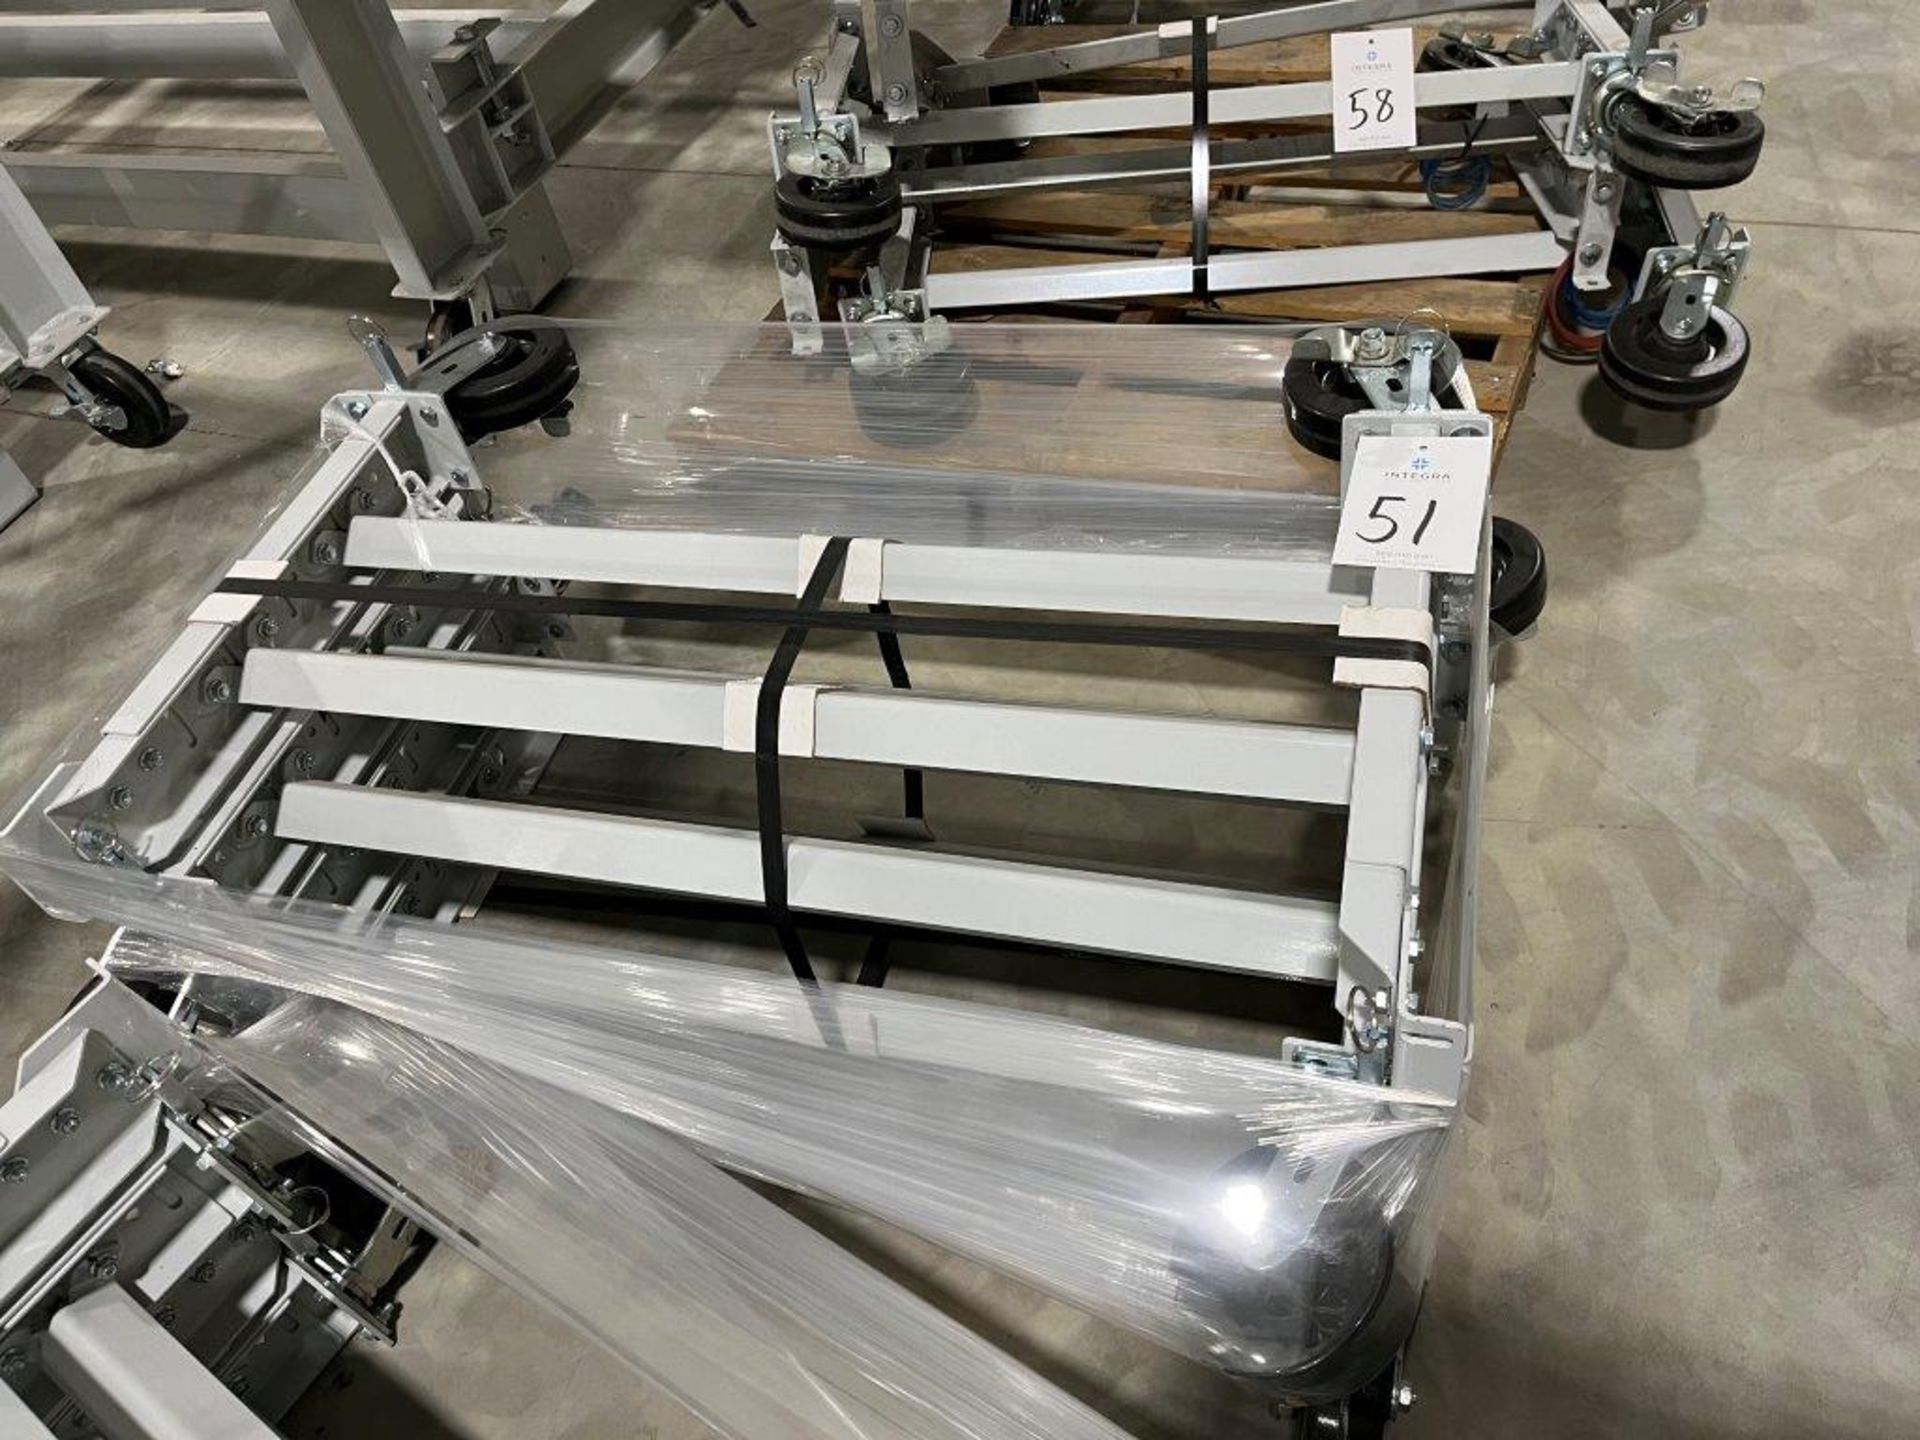 (8) Adjustable Supports for 48" Conveyor